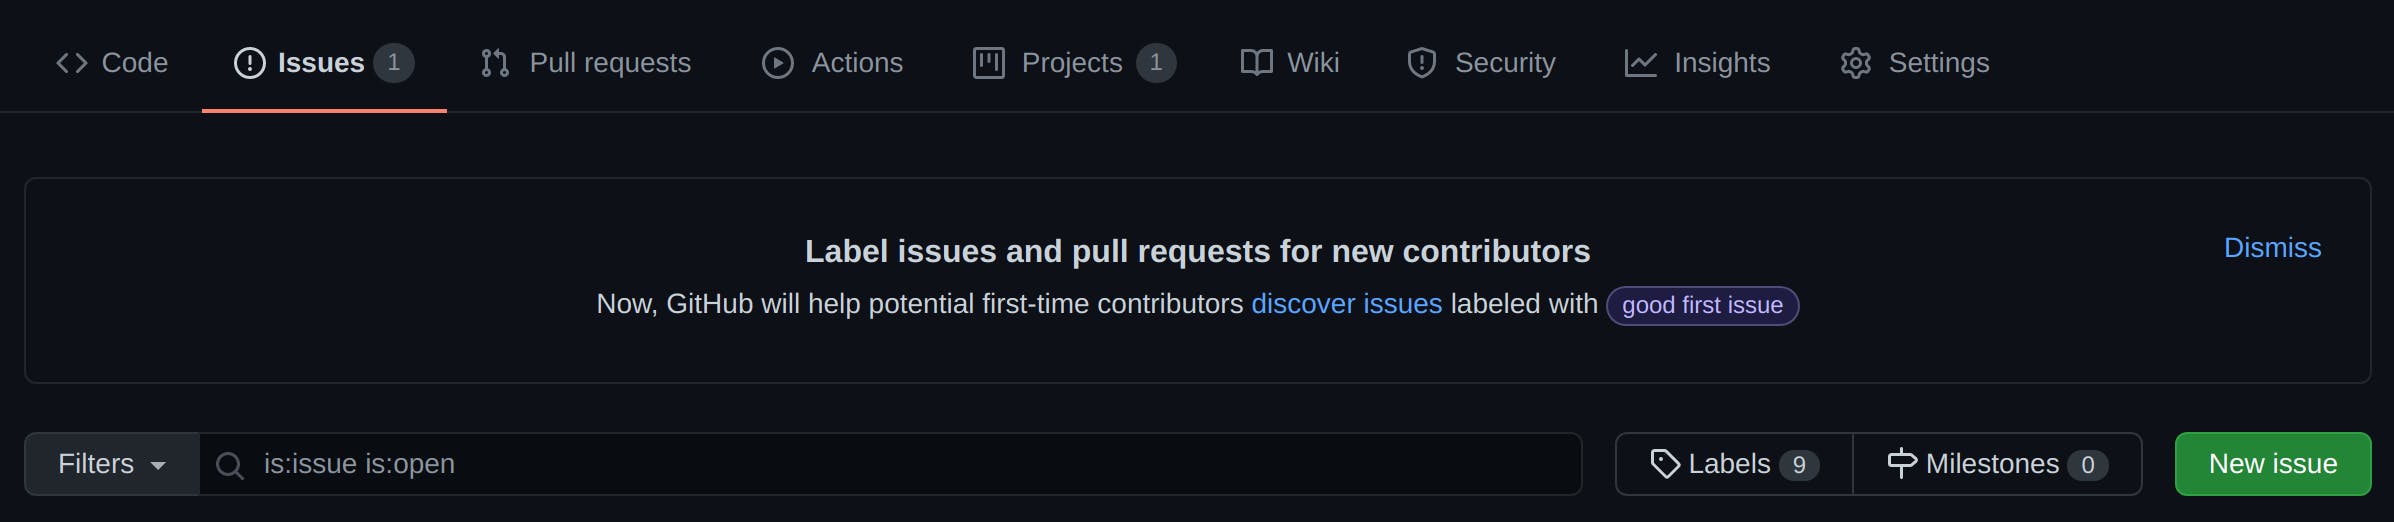 github-issues-page